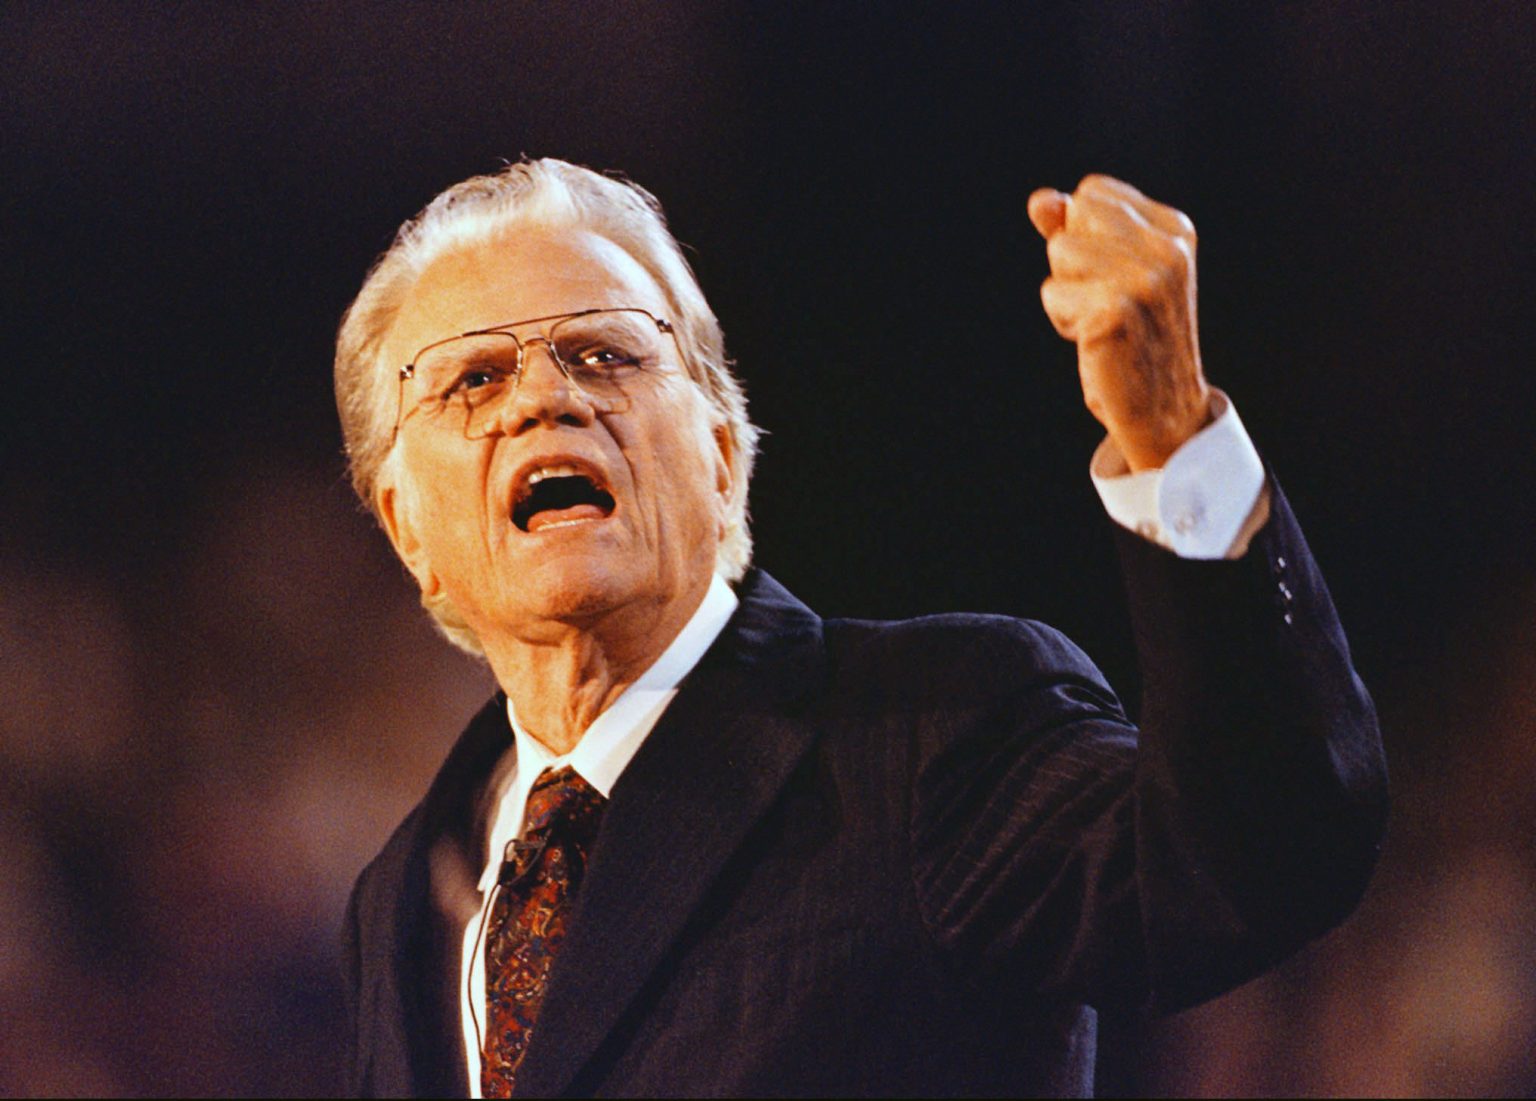 DOWNLOAD MP3: What Does it Mean to be Born Again? by Evangelist BILLY GRAHAM (Sermon) 6